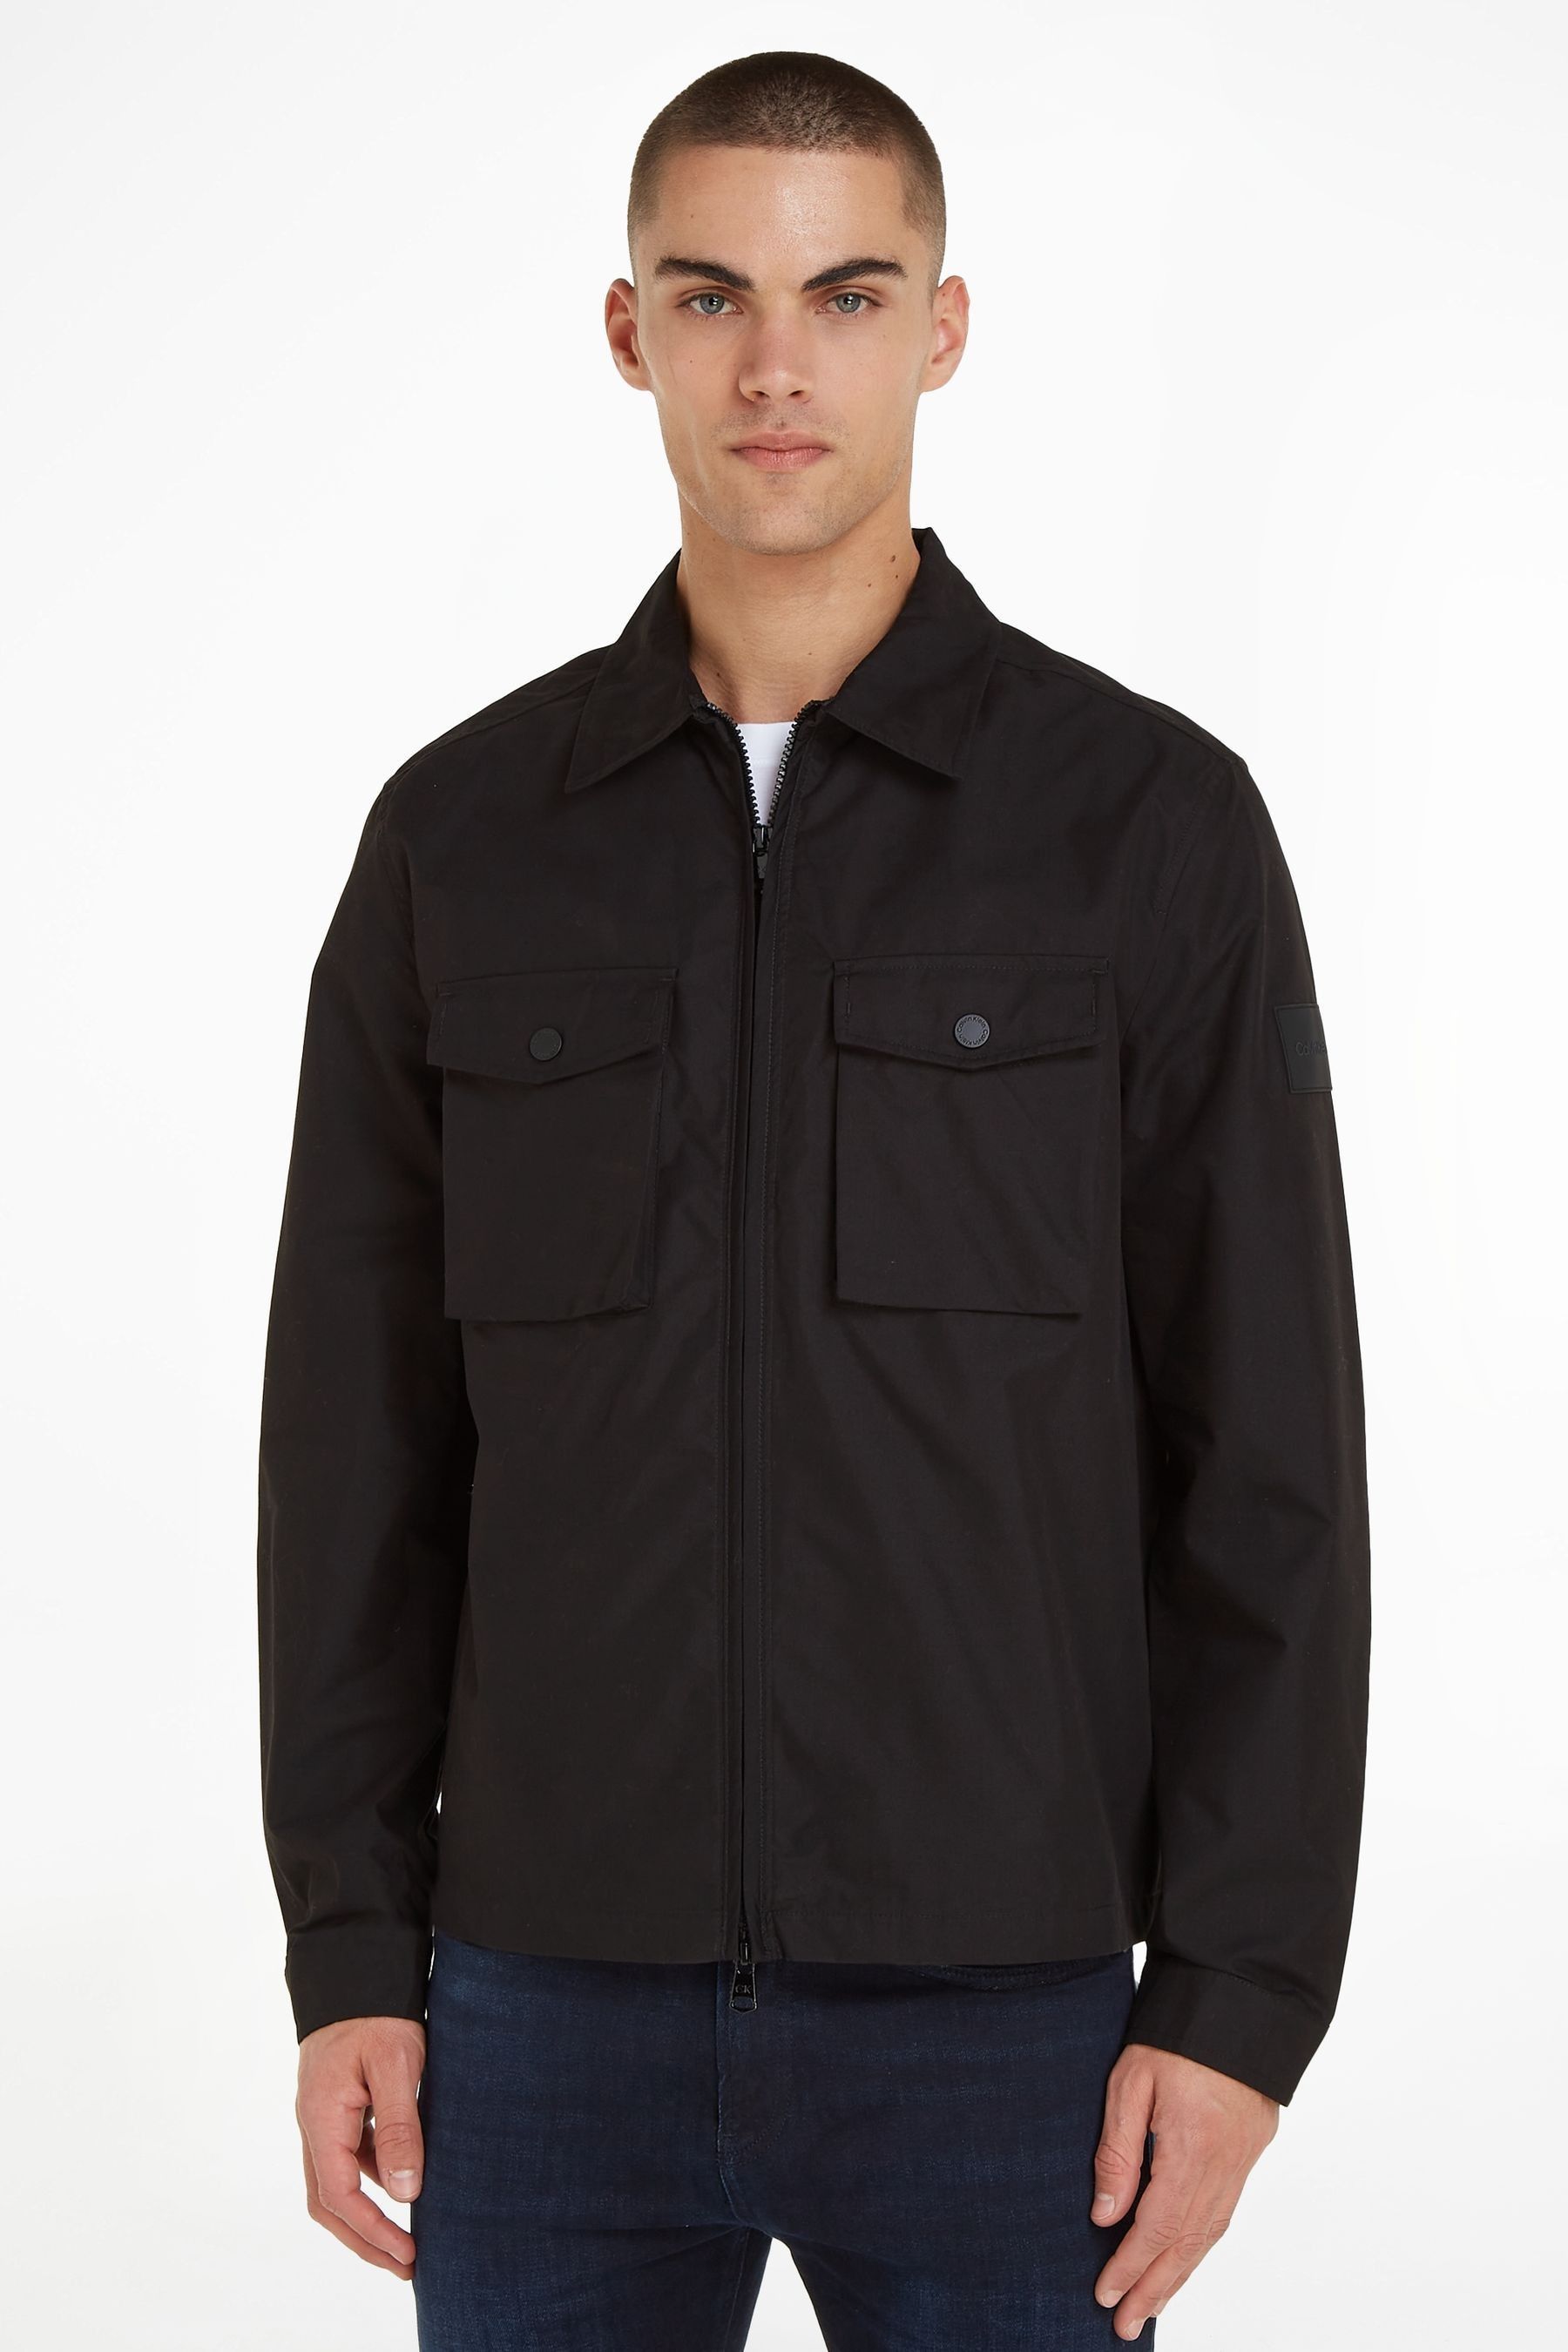 Buy Calvin Klein Recycled Light Black Shacket from the Next UK online shop